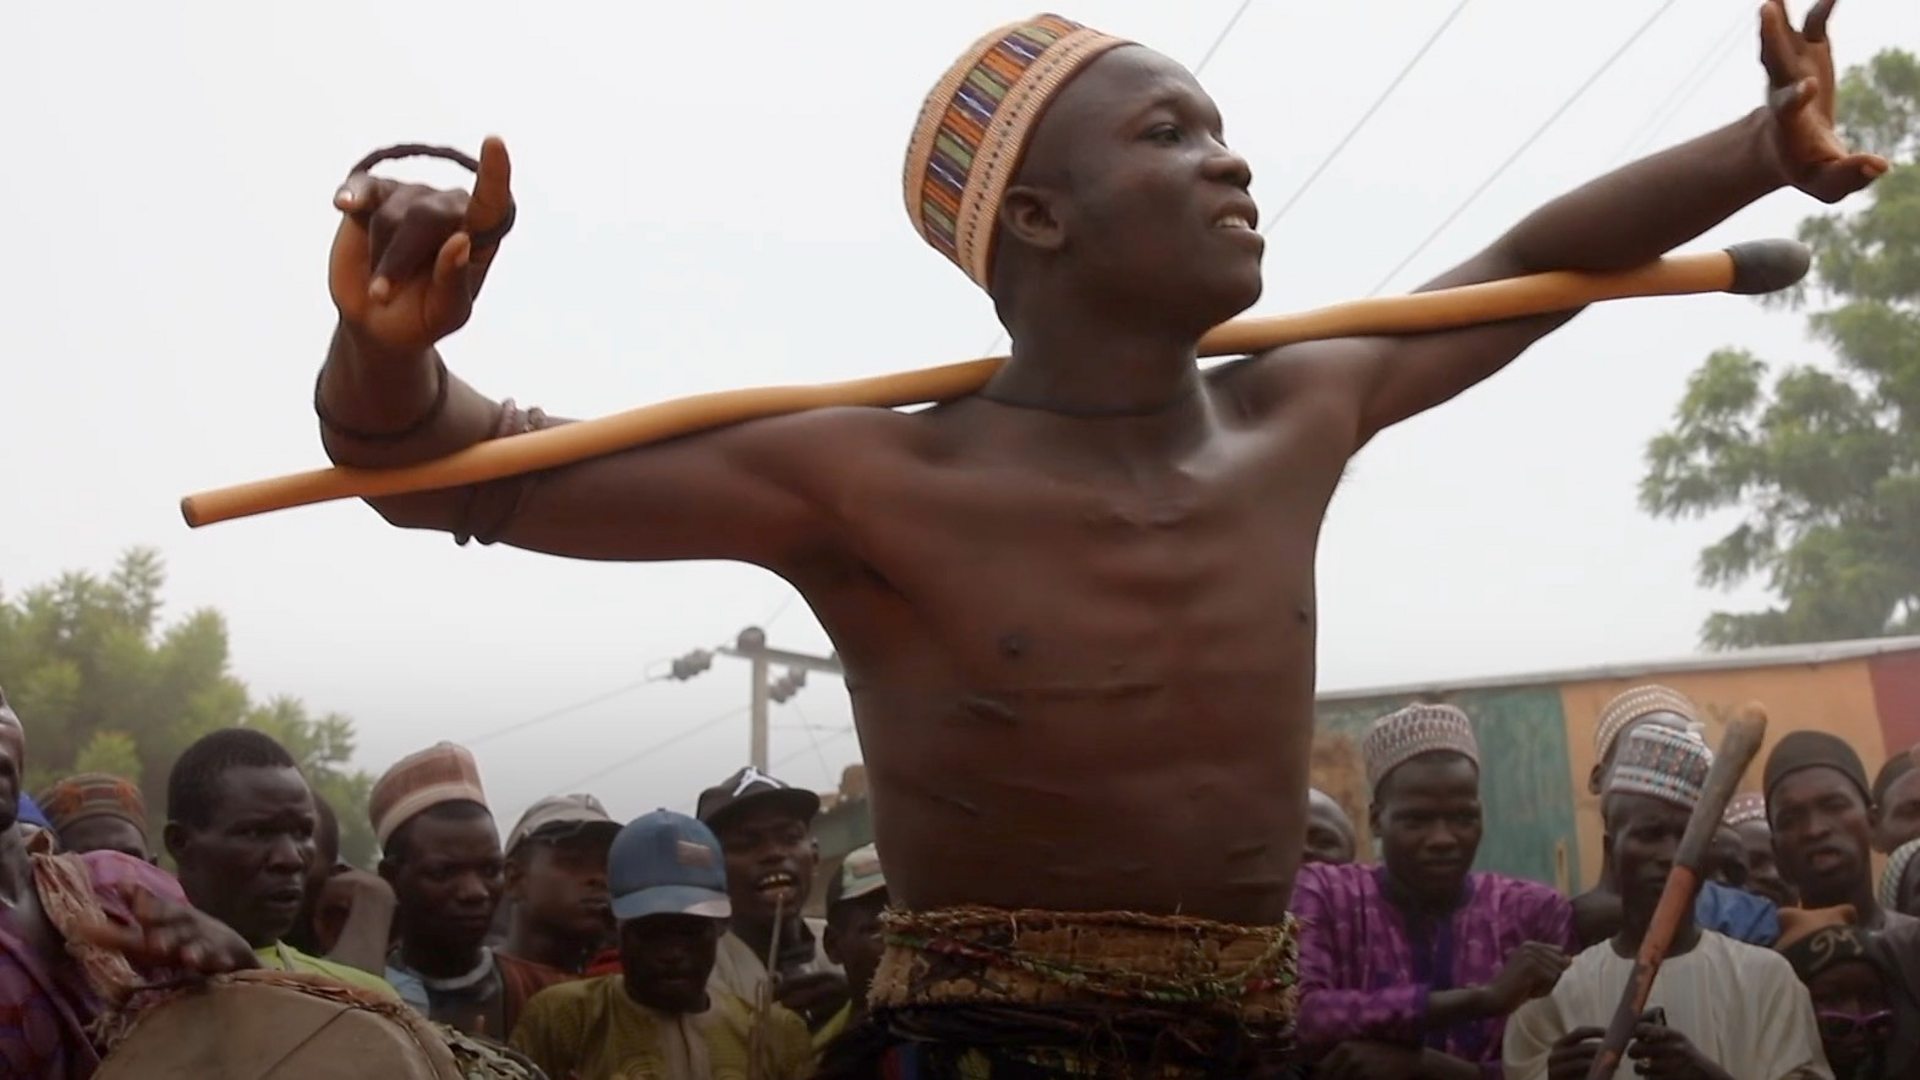 African Culture: 'Sharo' A fulani tradition where men brutally flog their selves as a price for marriage